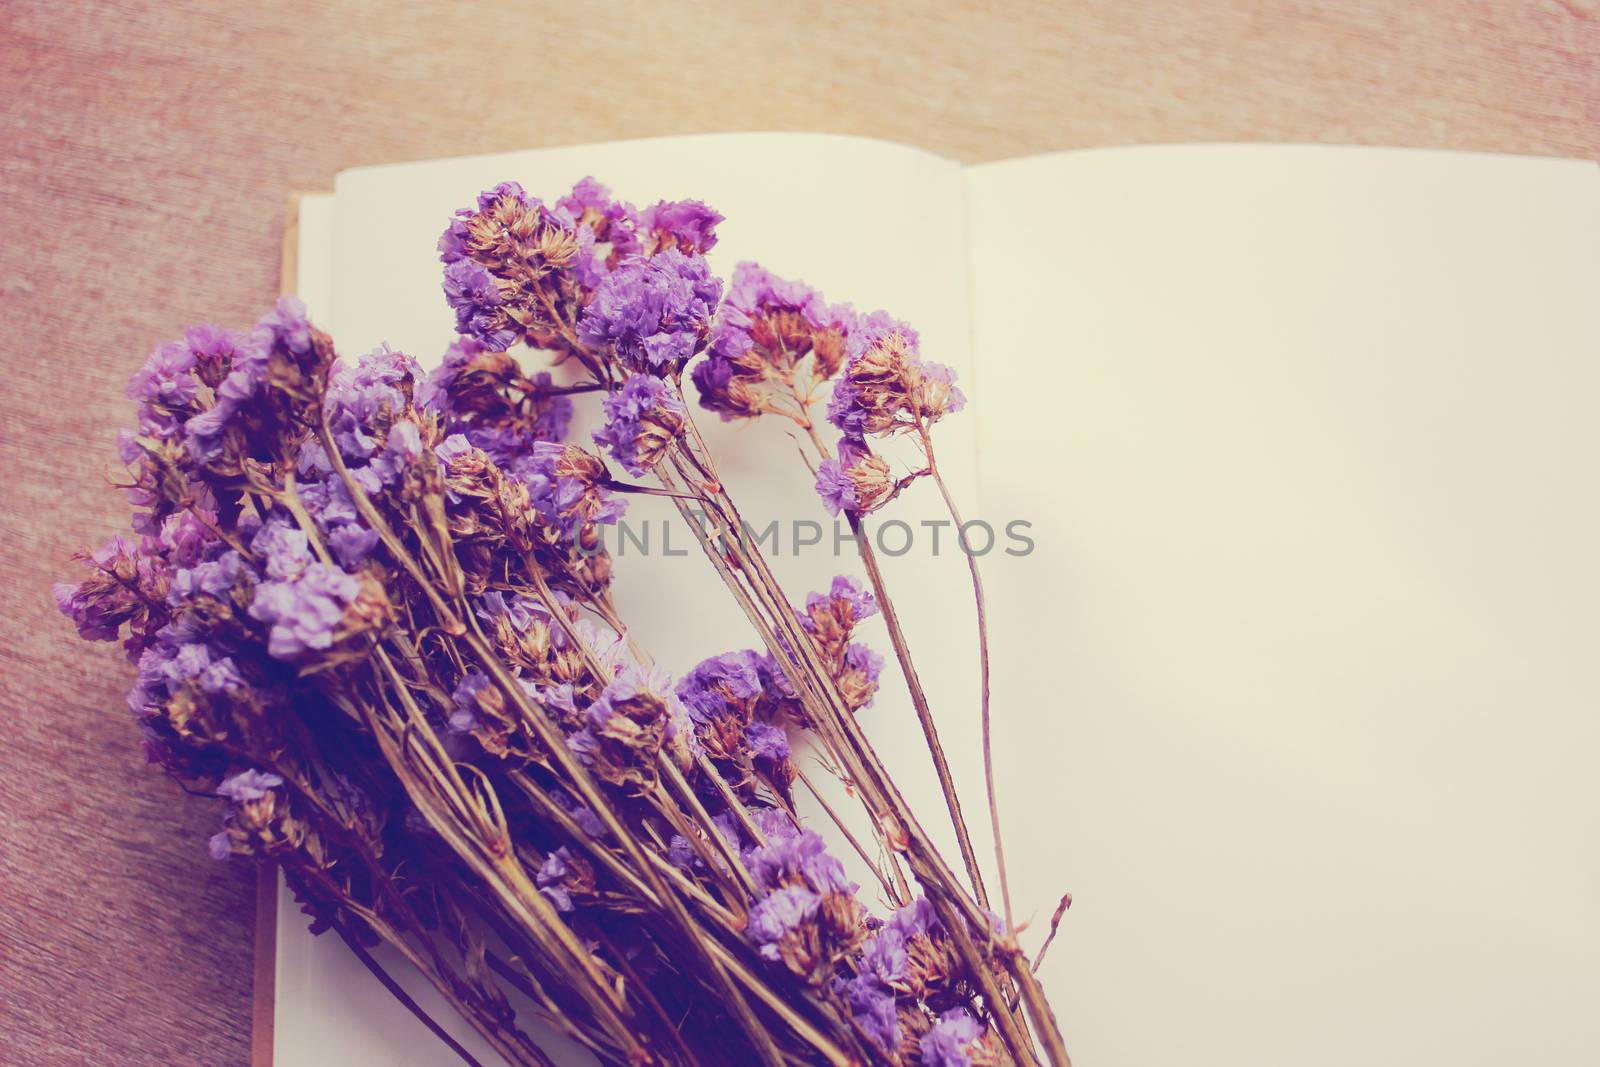 Blank notebook and dried statice flowers with retro filter effec by nuchylee